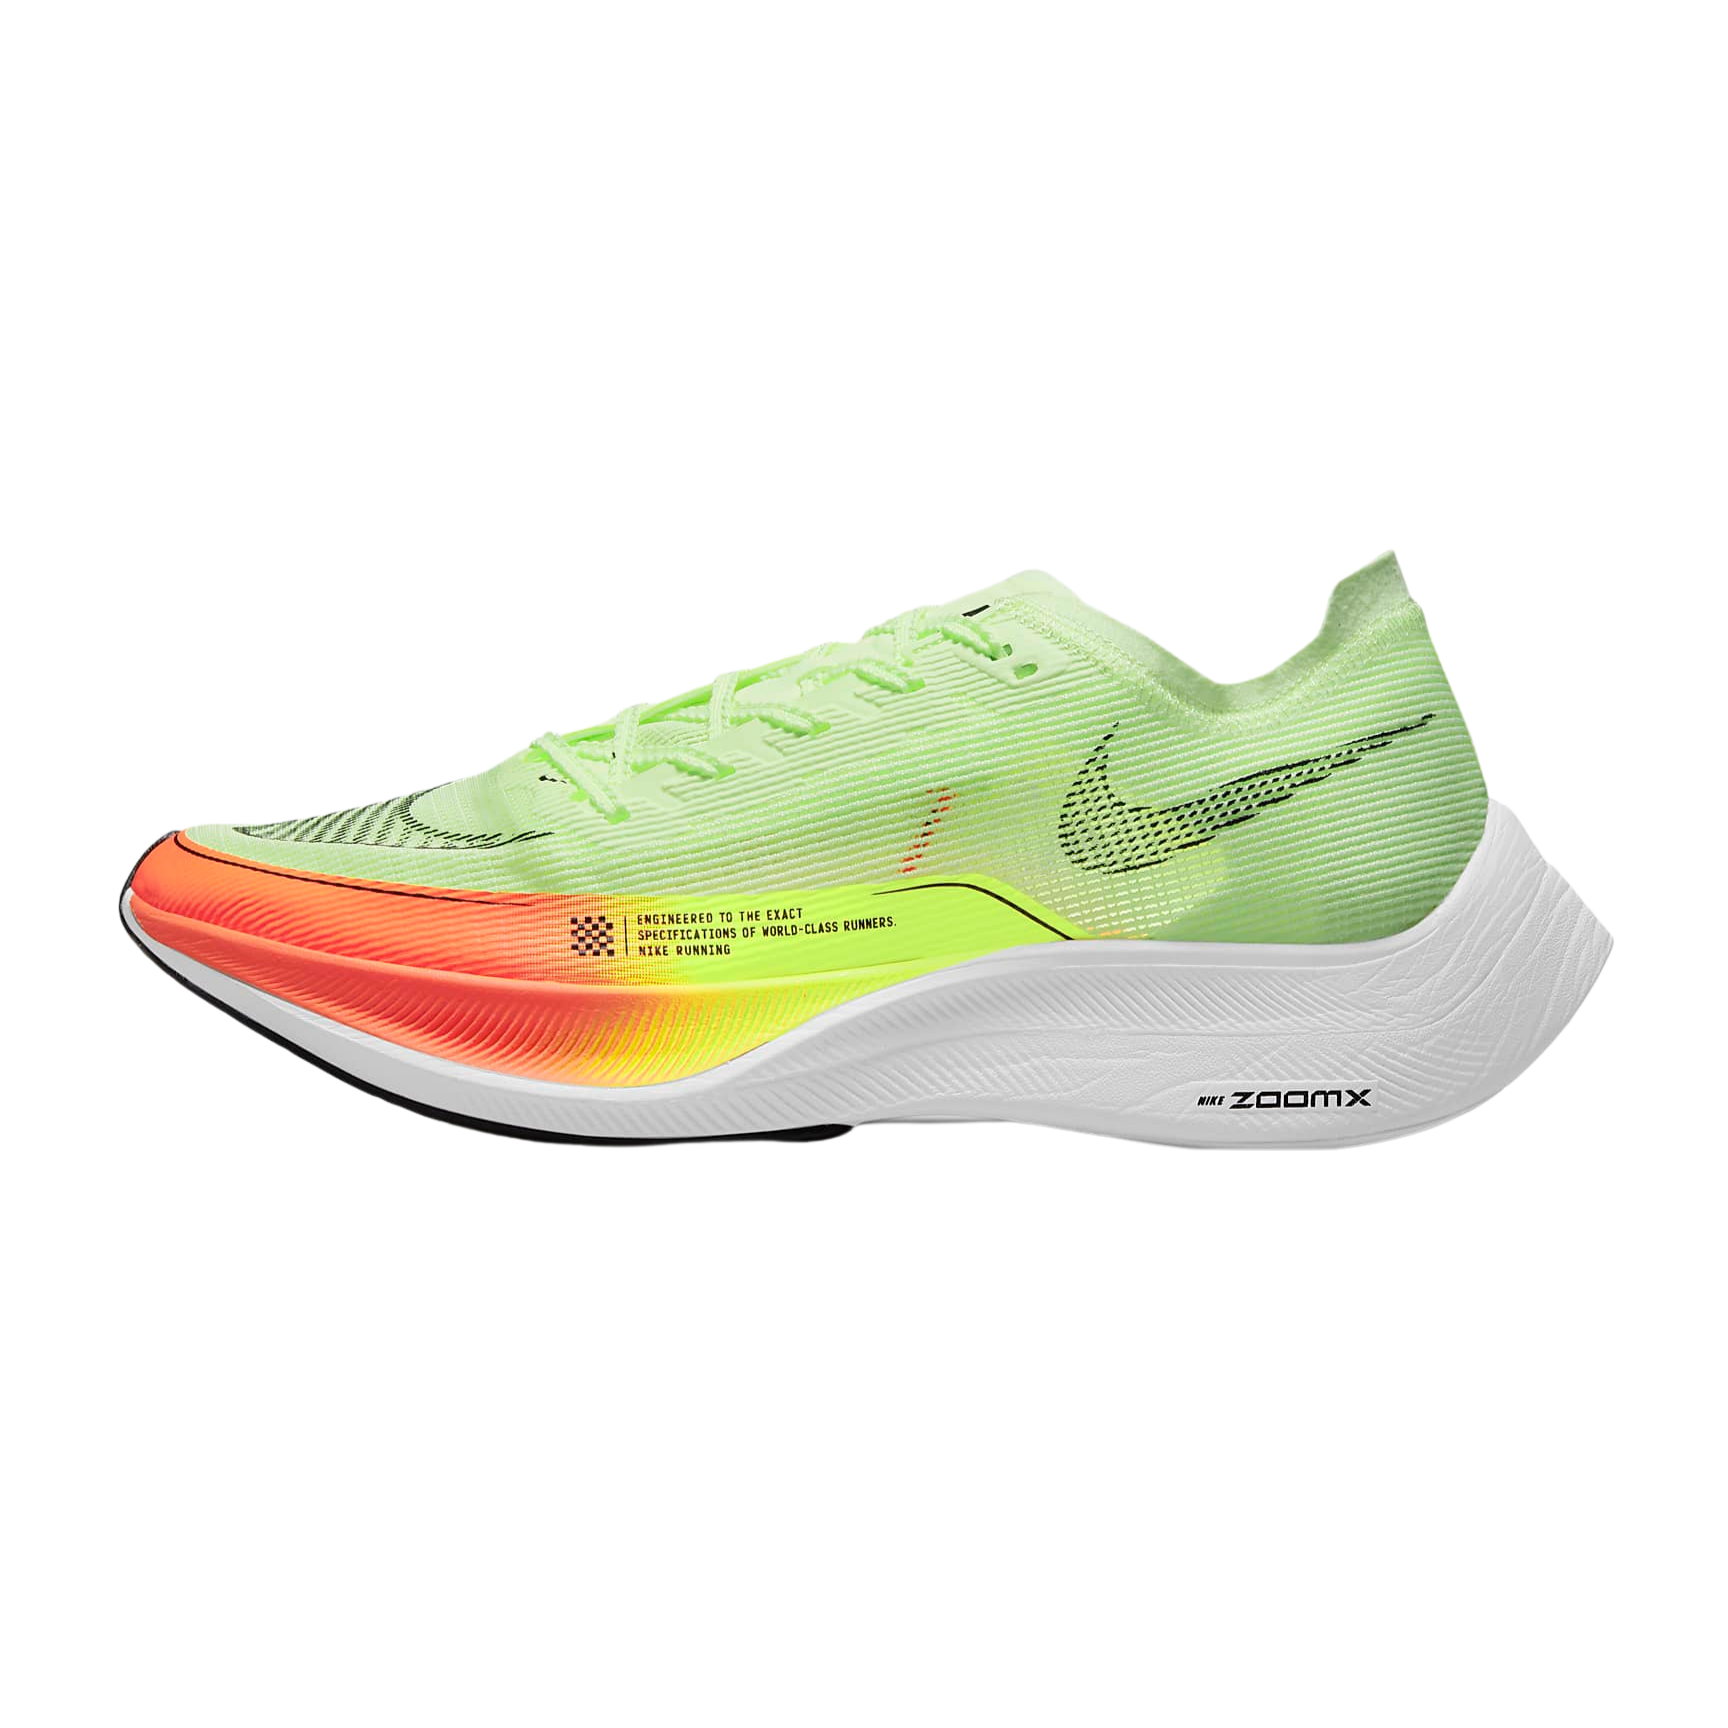 nike vaporfly 2 review